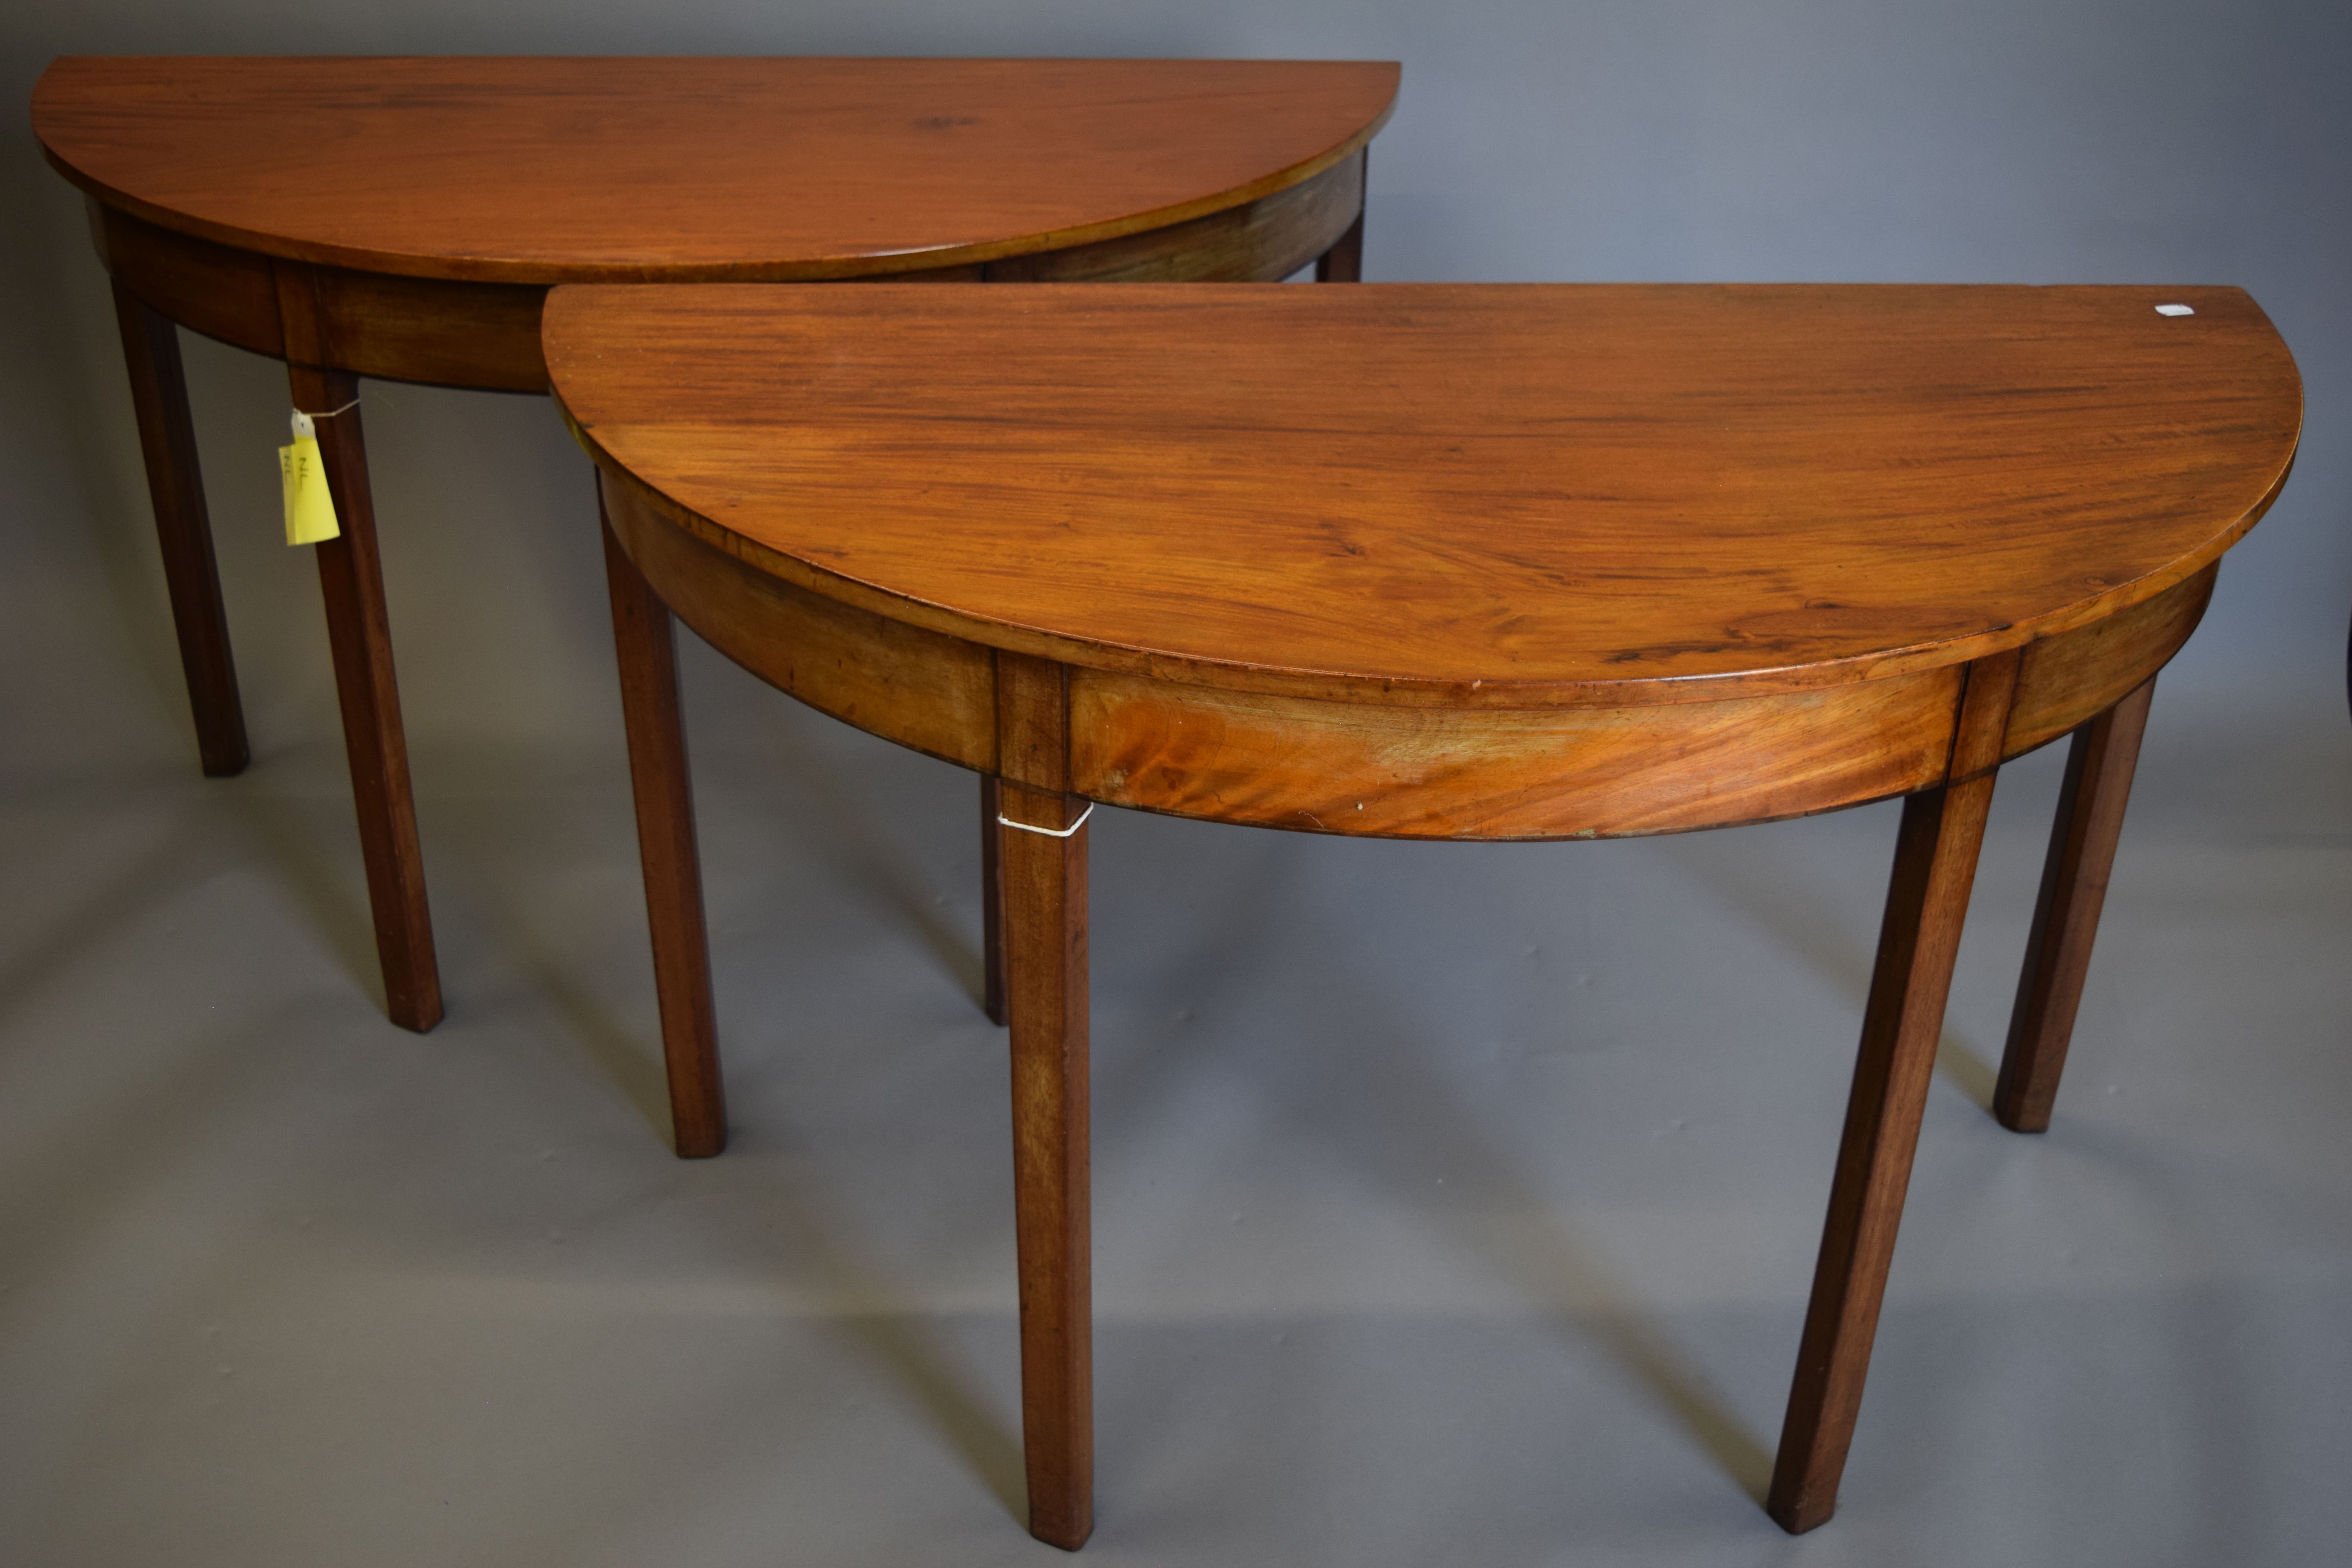 Two 19th century mahogany demi-lune tables. Each 121 cm wide, 72 cm high.